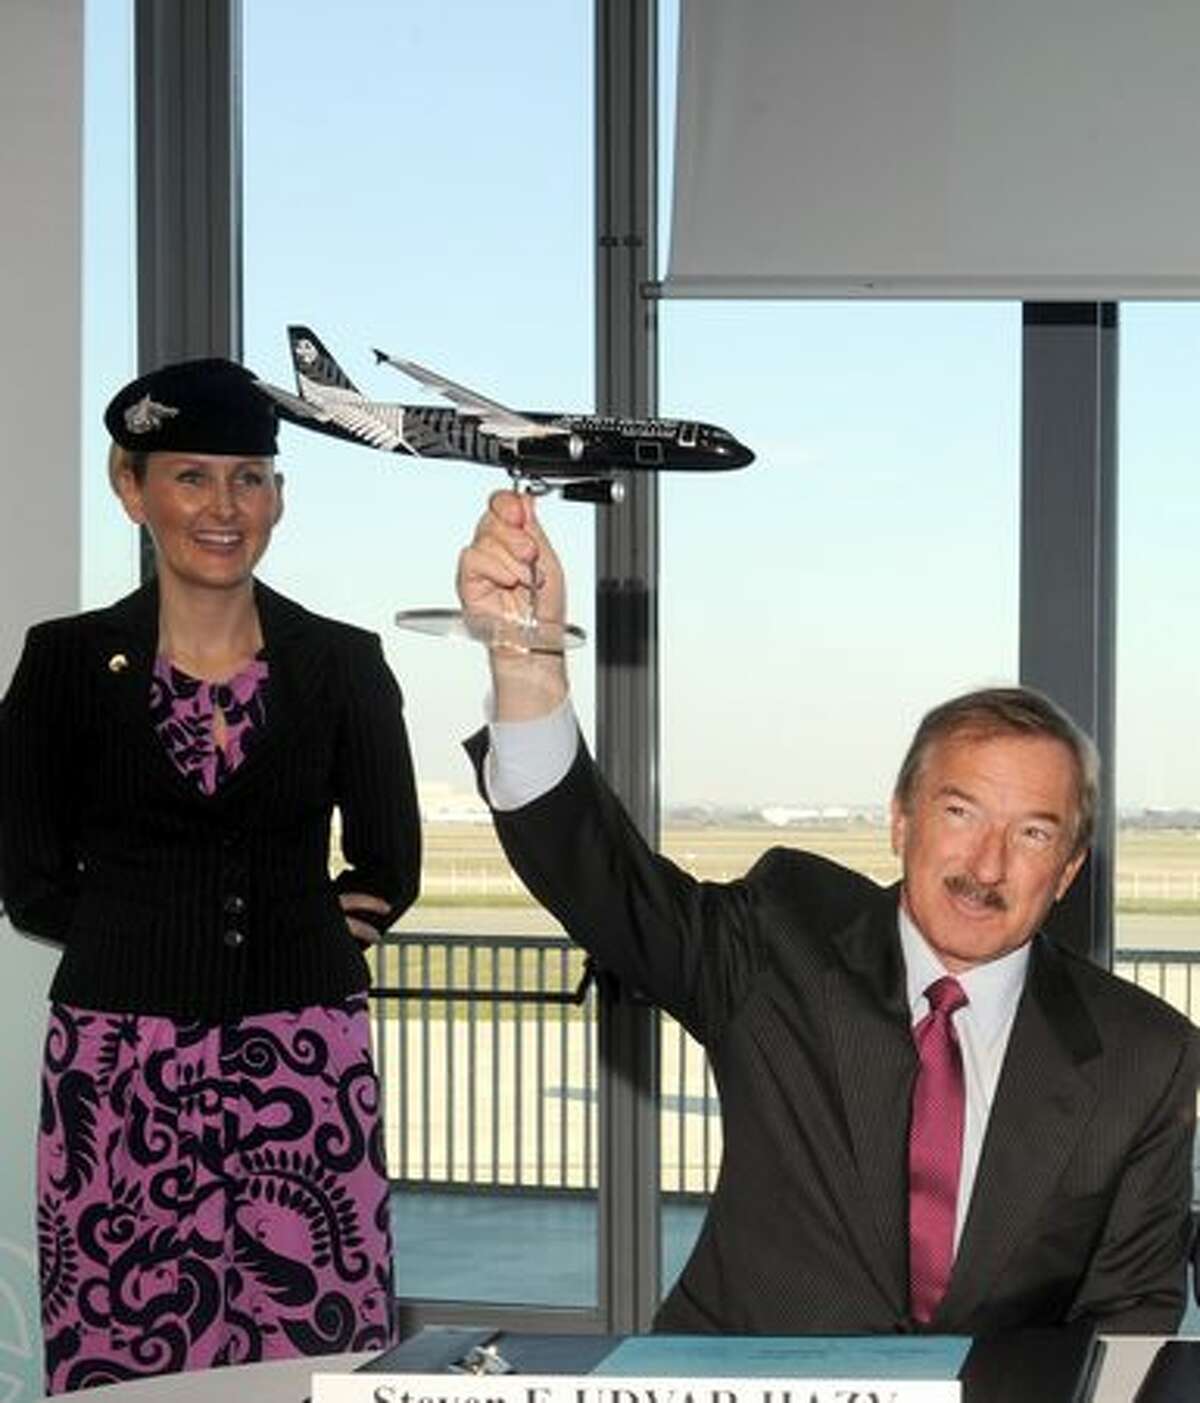 Air Lease Corporation President Stevan Udvar-Hazy holds an Airbus model as he attends a press conference on January 28, 2011 in Colomiers, France during the first delivery of an A320 Airbus painted with the logo of New Zealand rugby national team, the All Blacks.